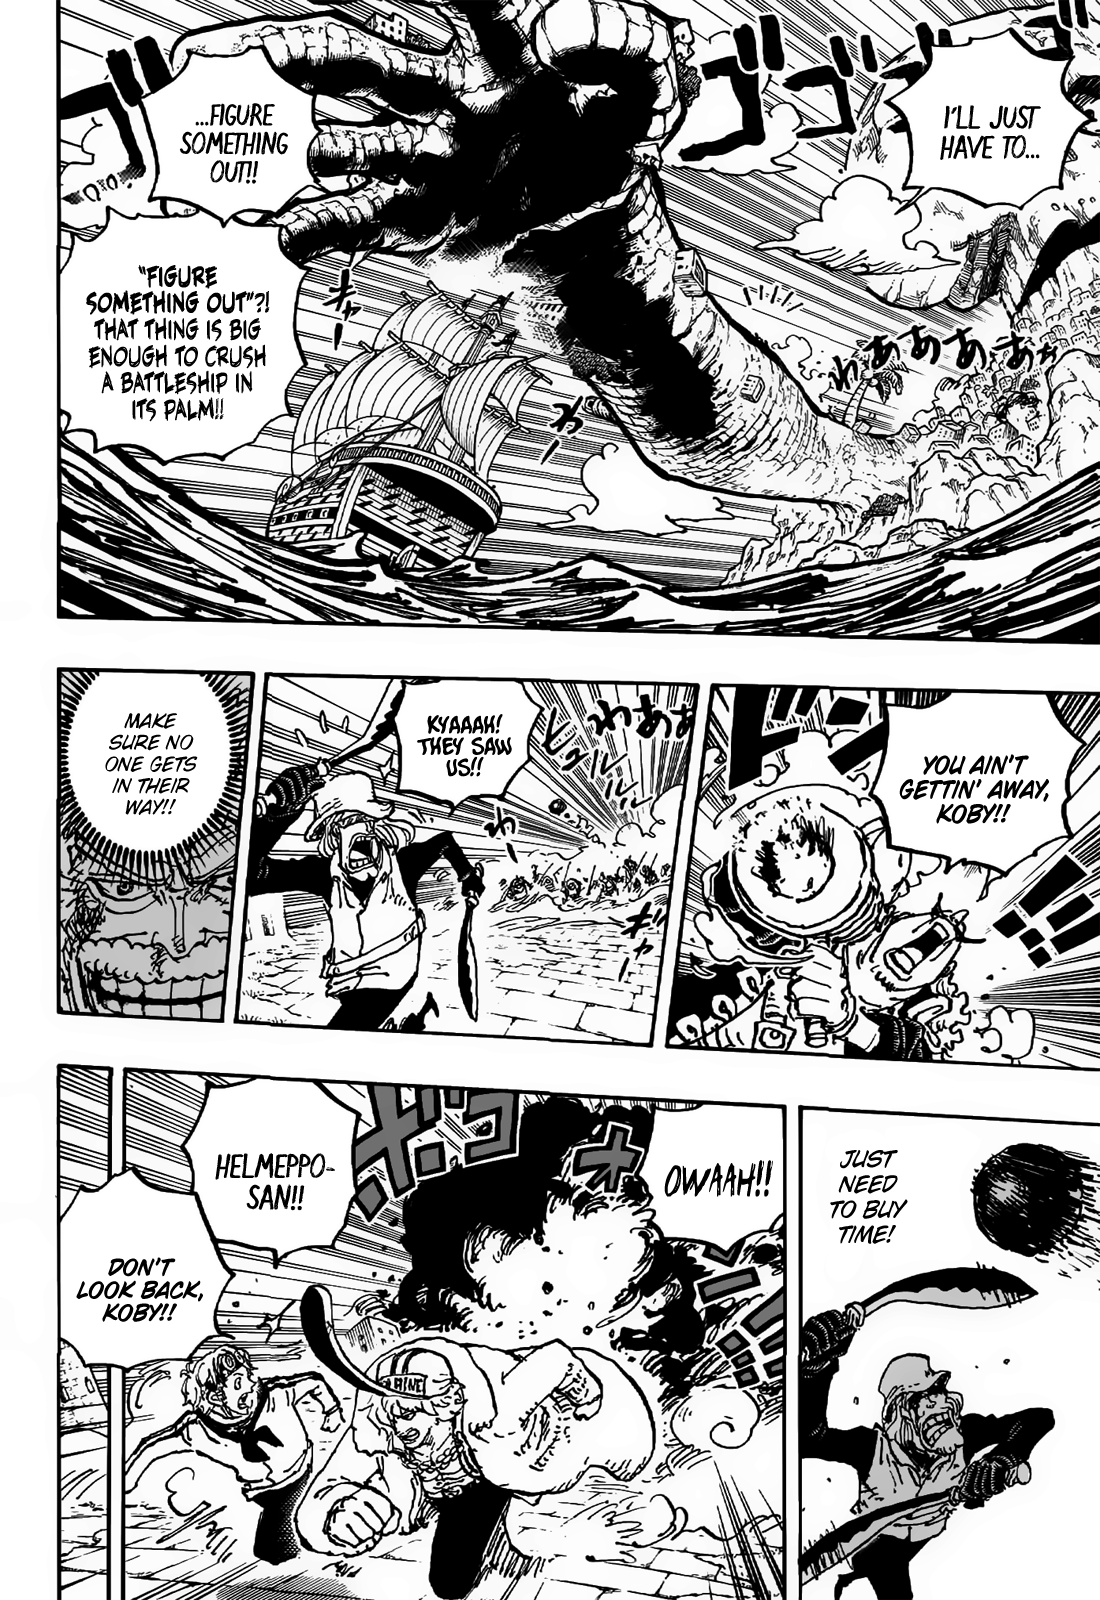 One Piece Chapter 1044 is out. Link - One Piece Bangladesh